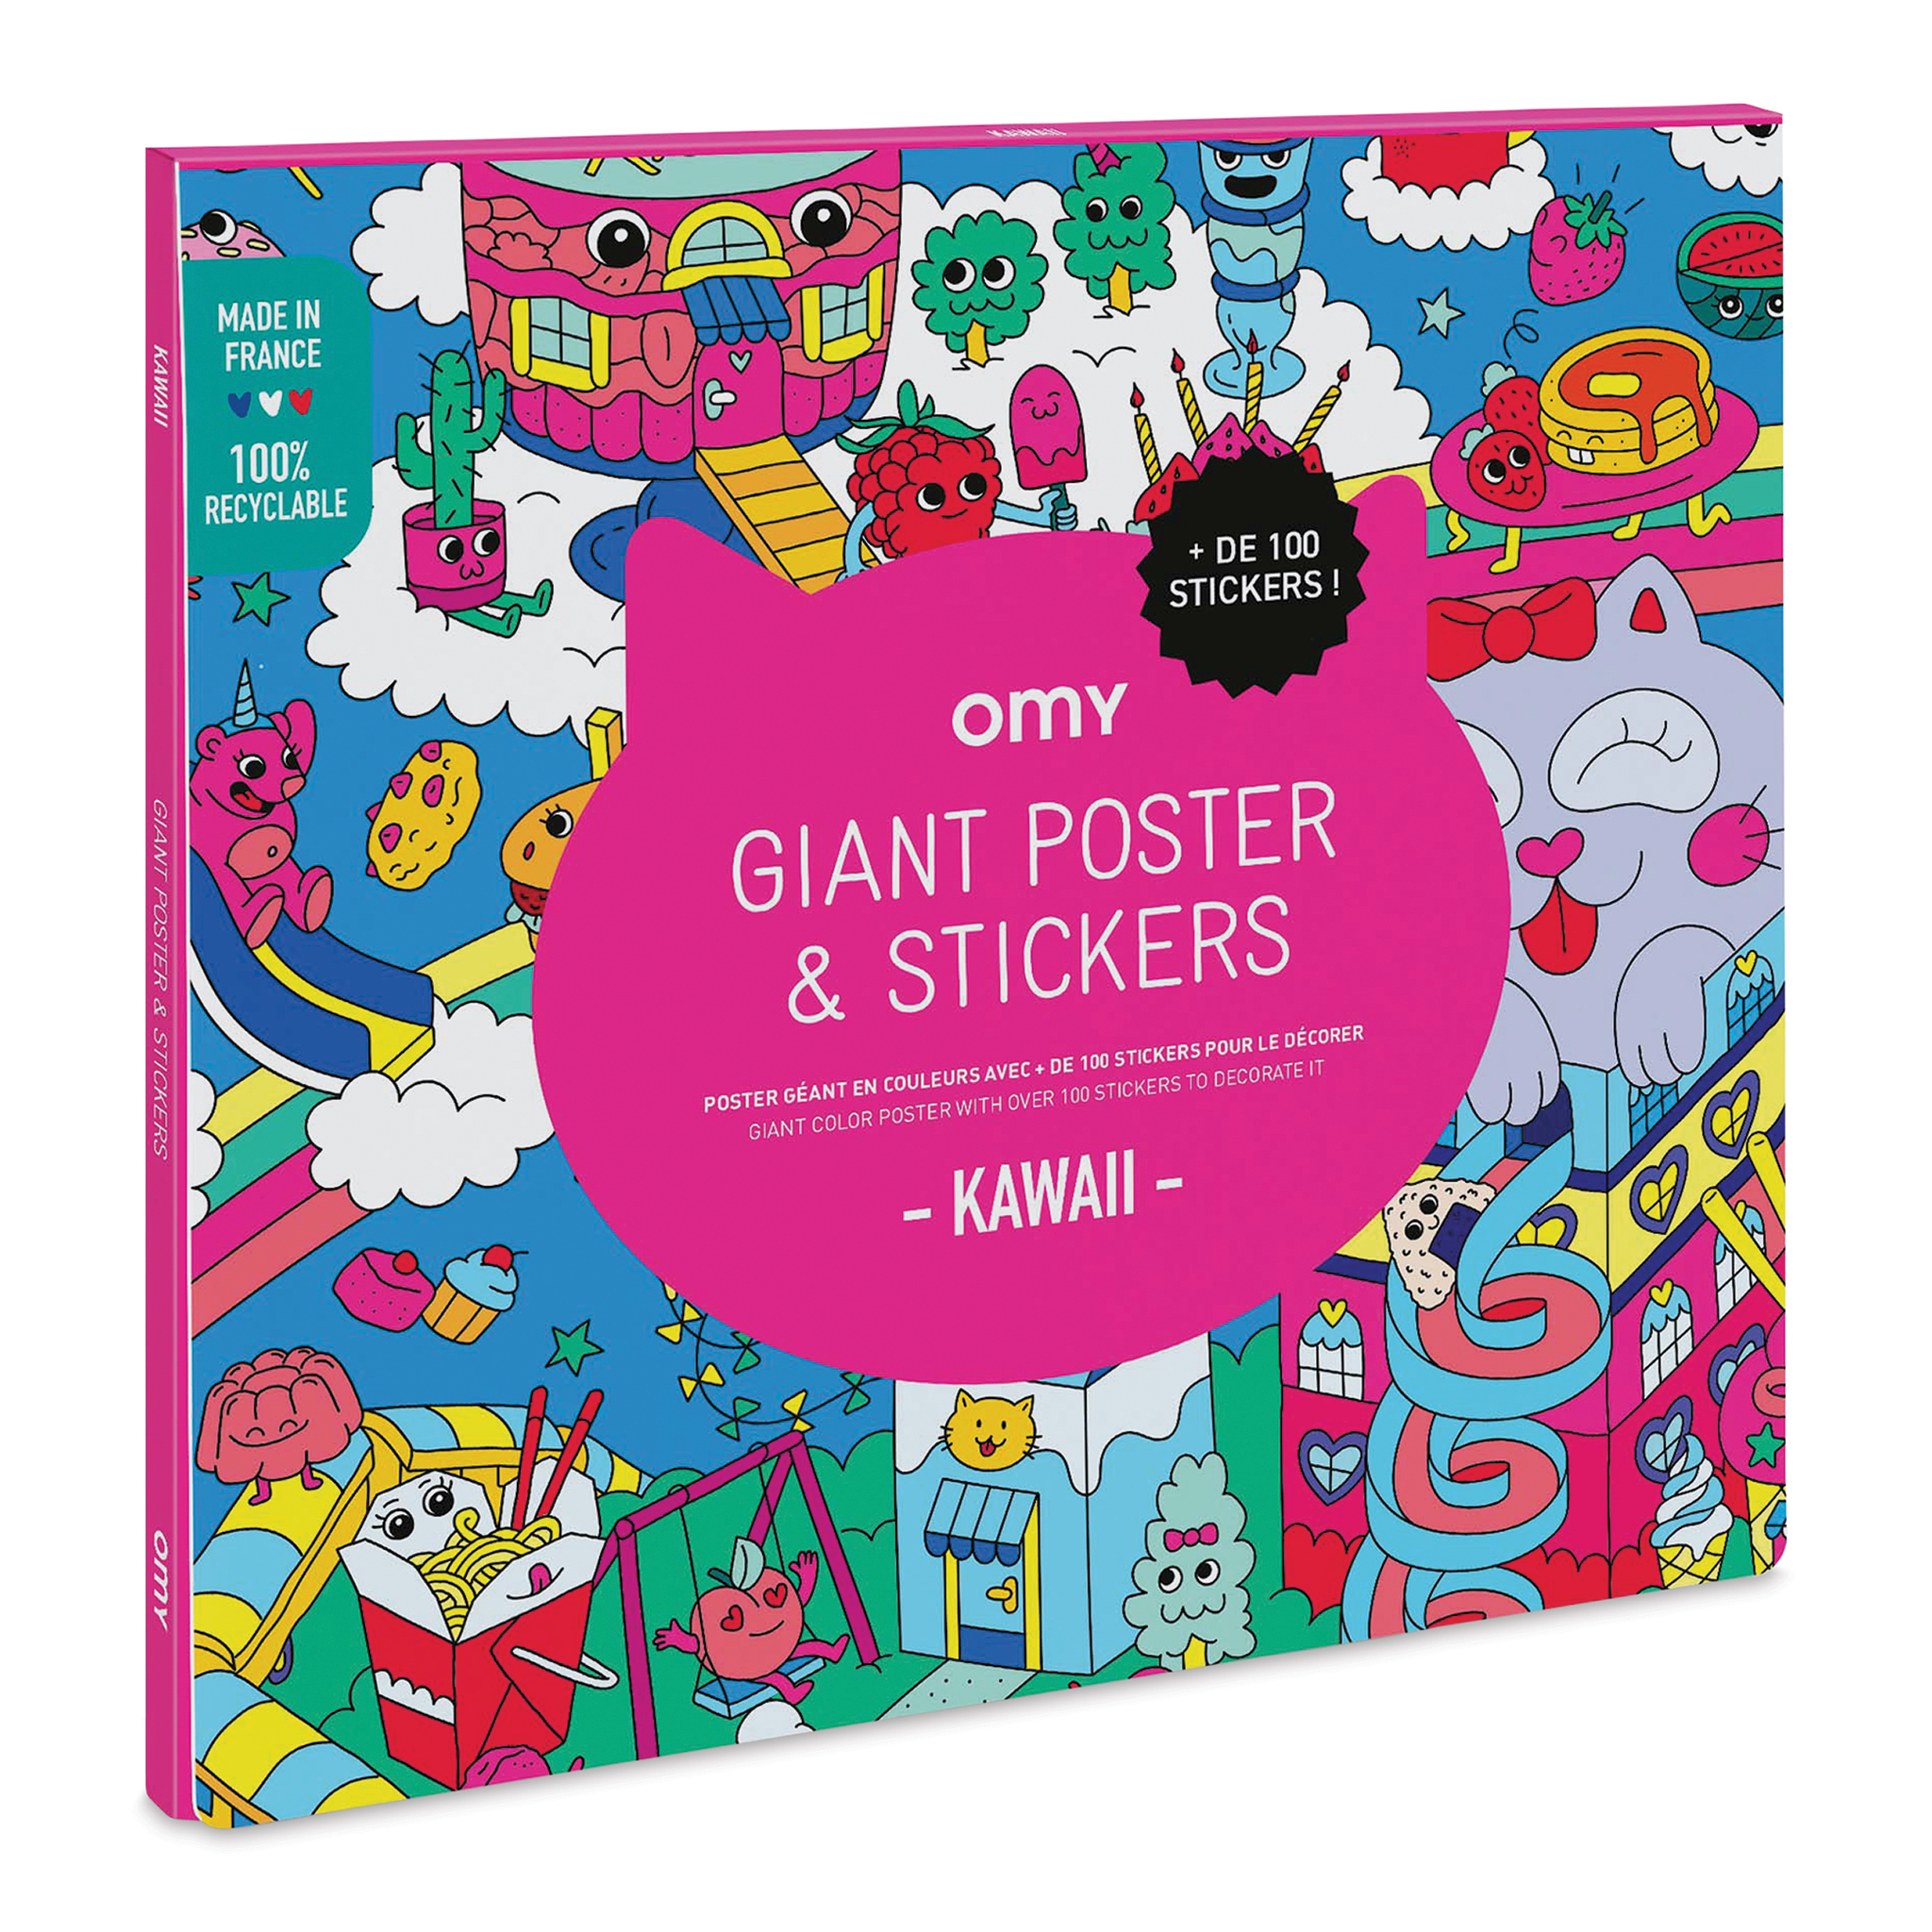 OMY Rub on Stickers Letters